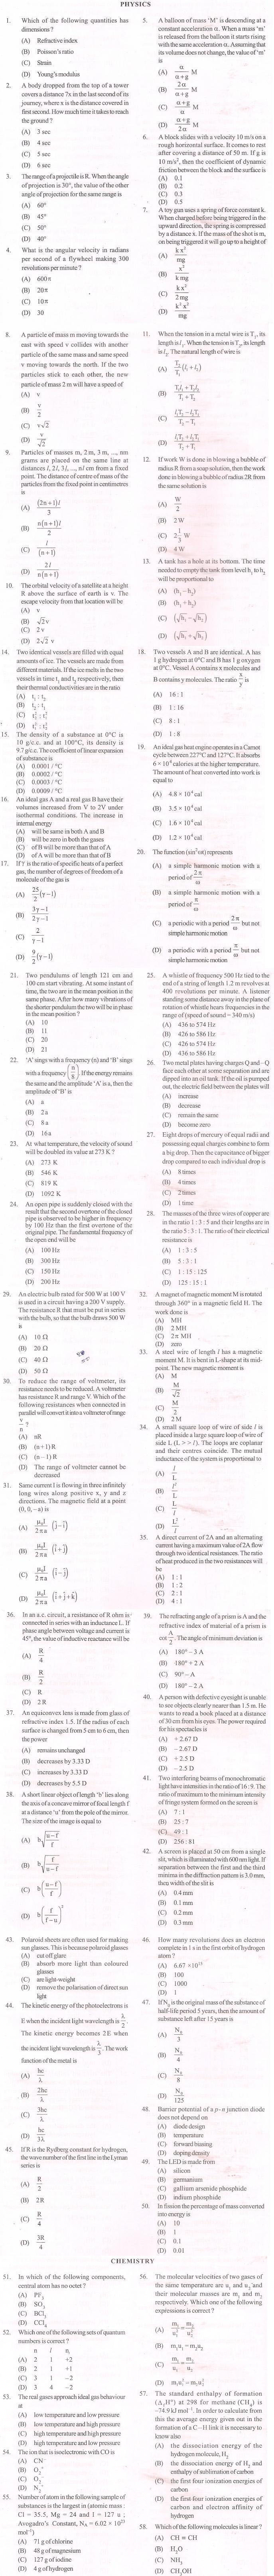 APJEE 2012 Question Papers - Physics & Chemistry